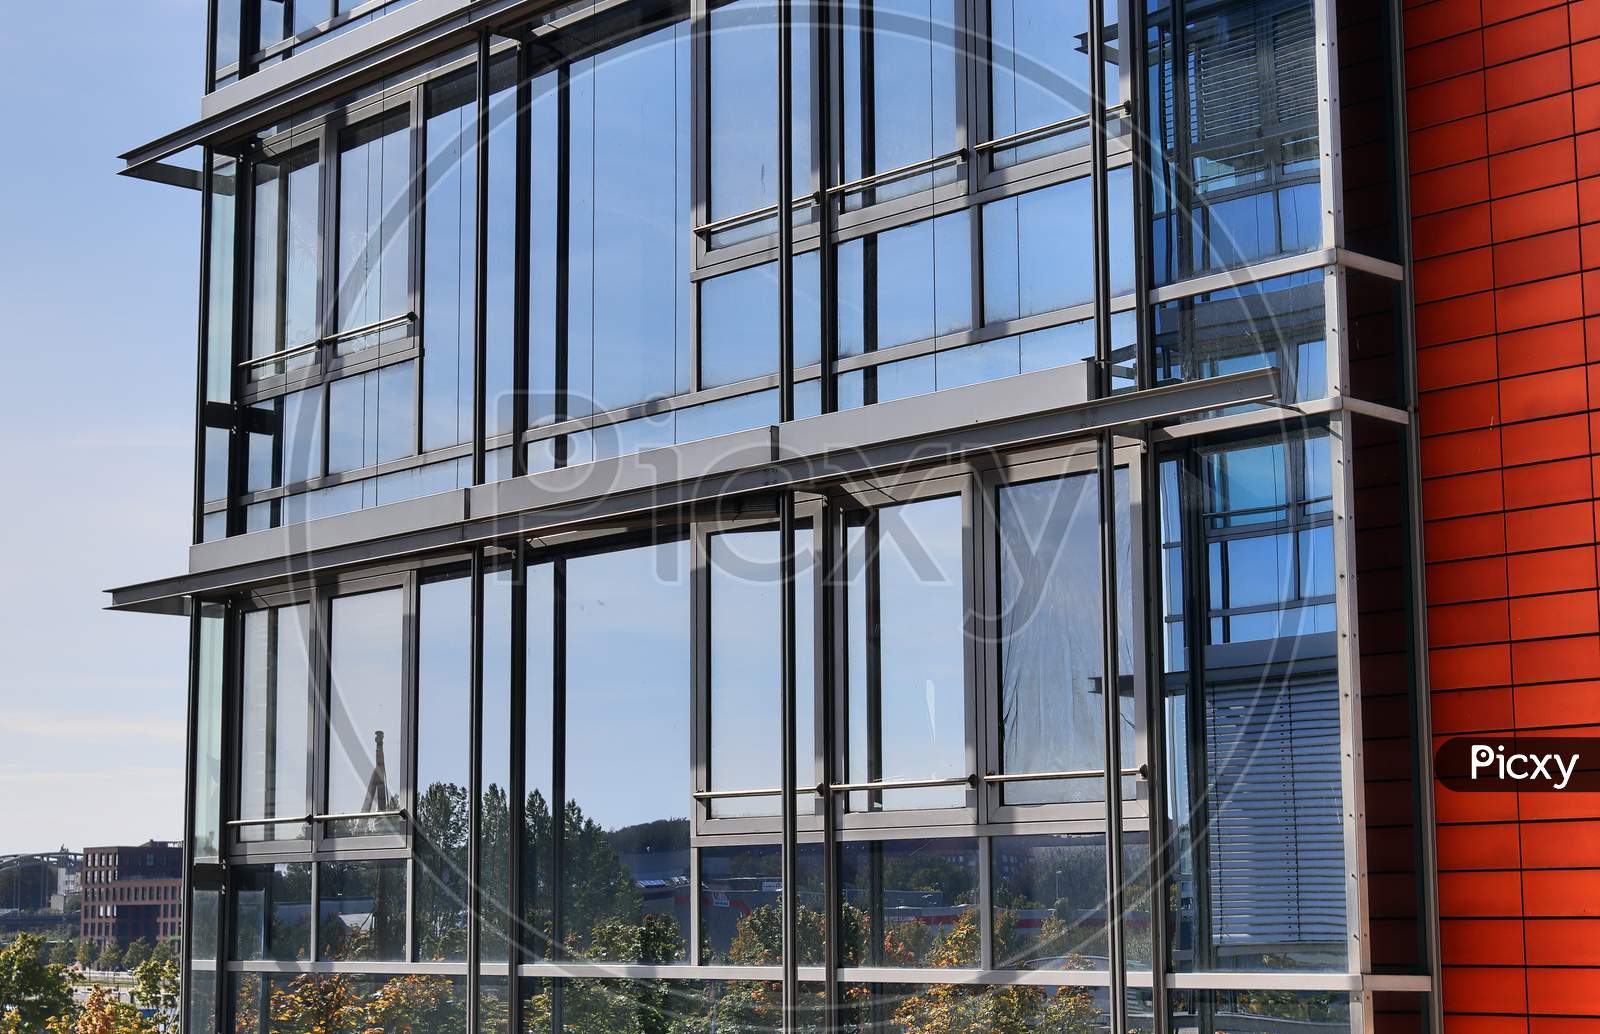 Modern office building facades with glass and reflecting sunlight in the windows found in kiel in germany